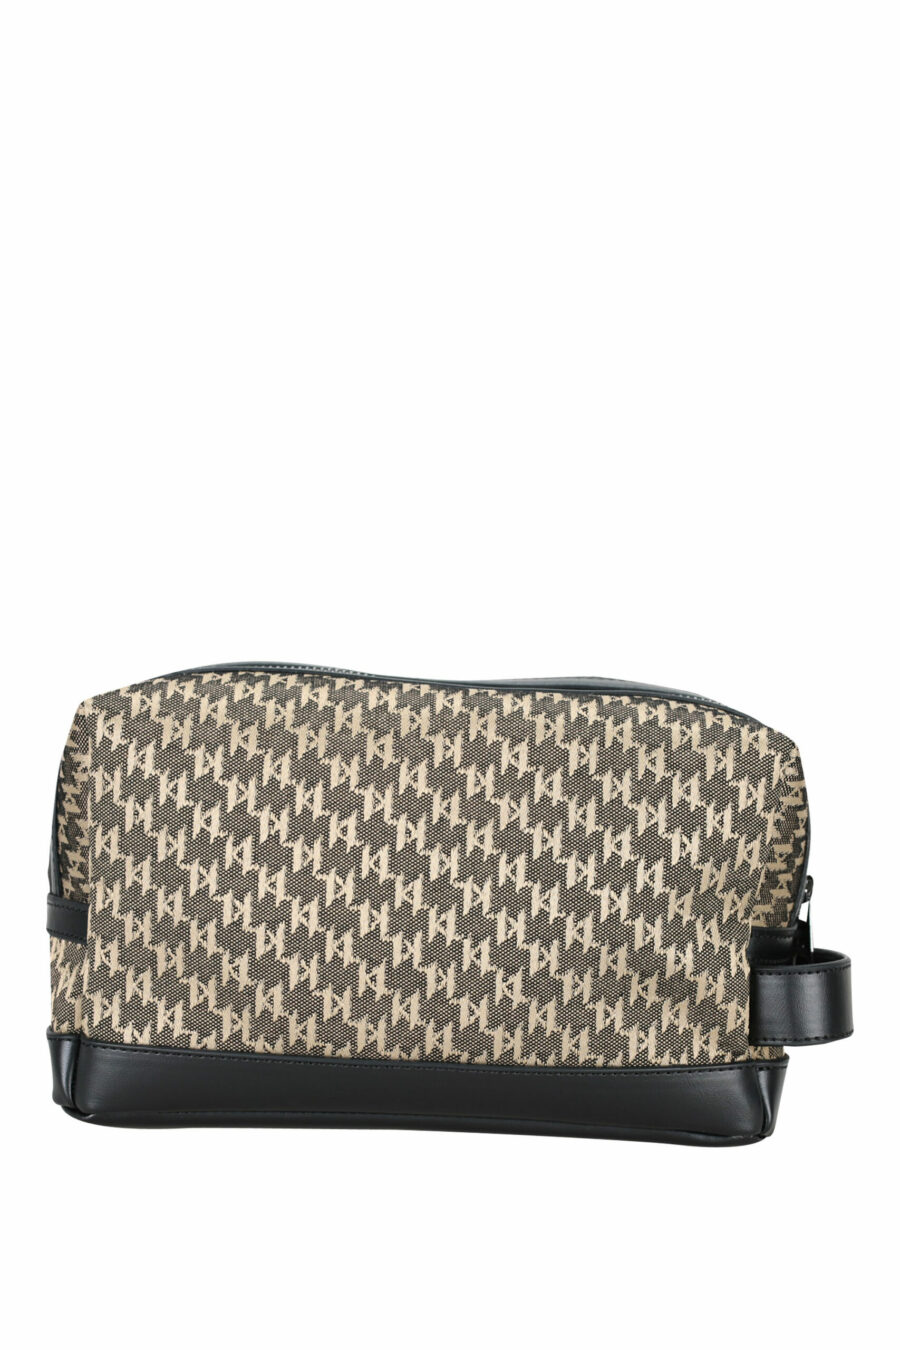 Toilet bag monogrammed grey with black - 4062226427401 2 scaled